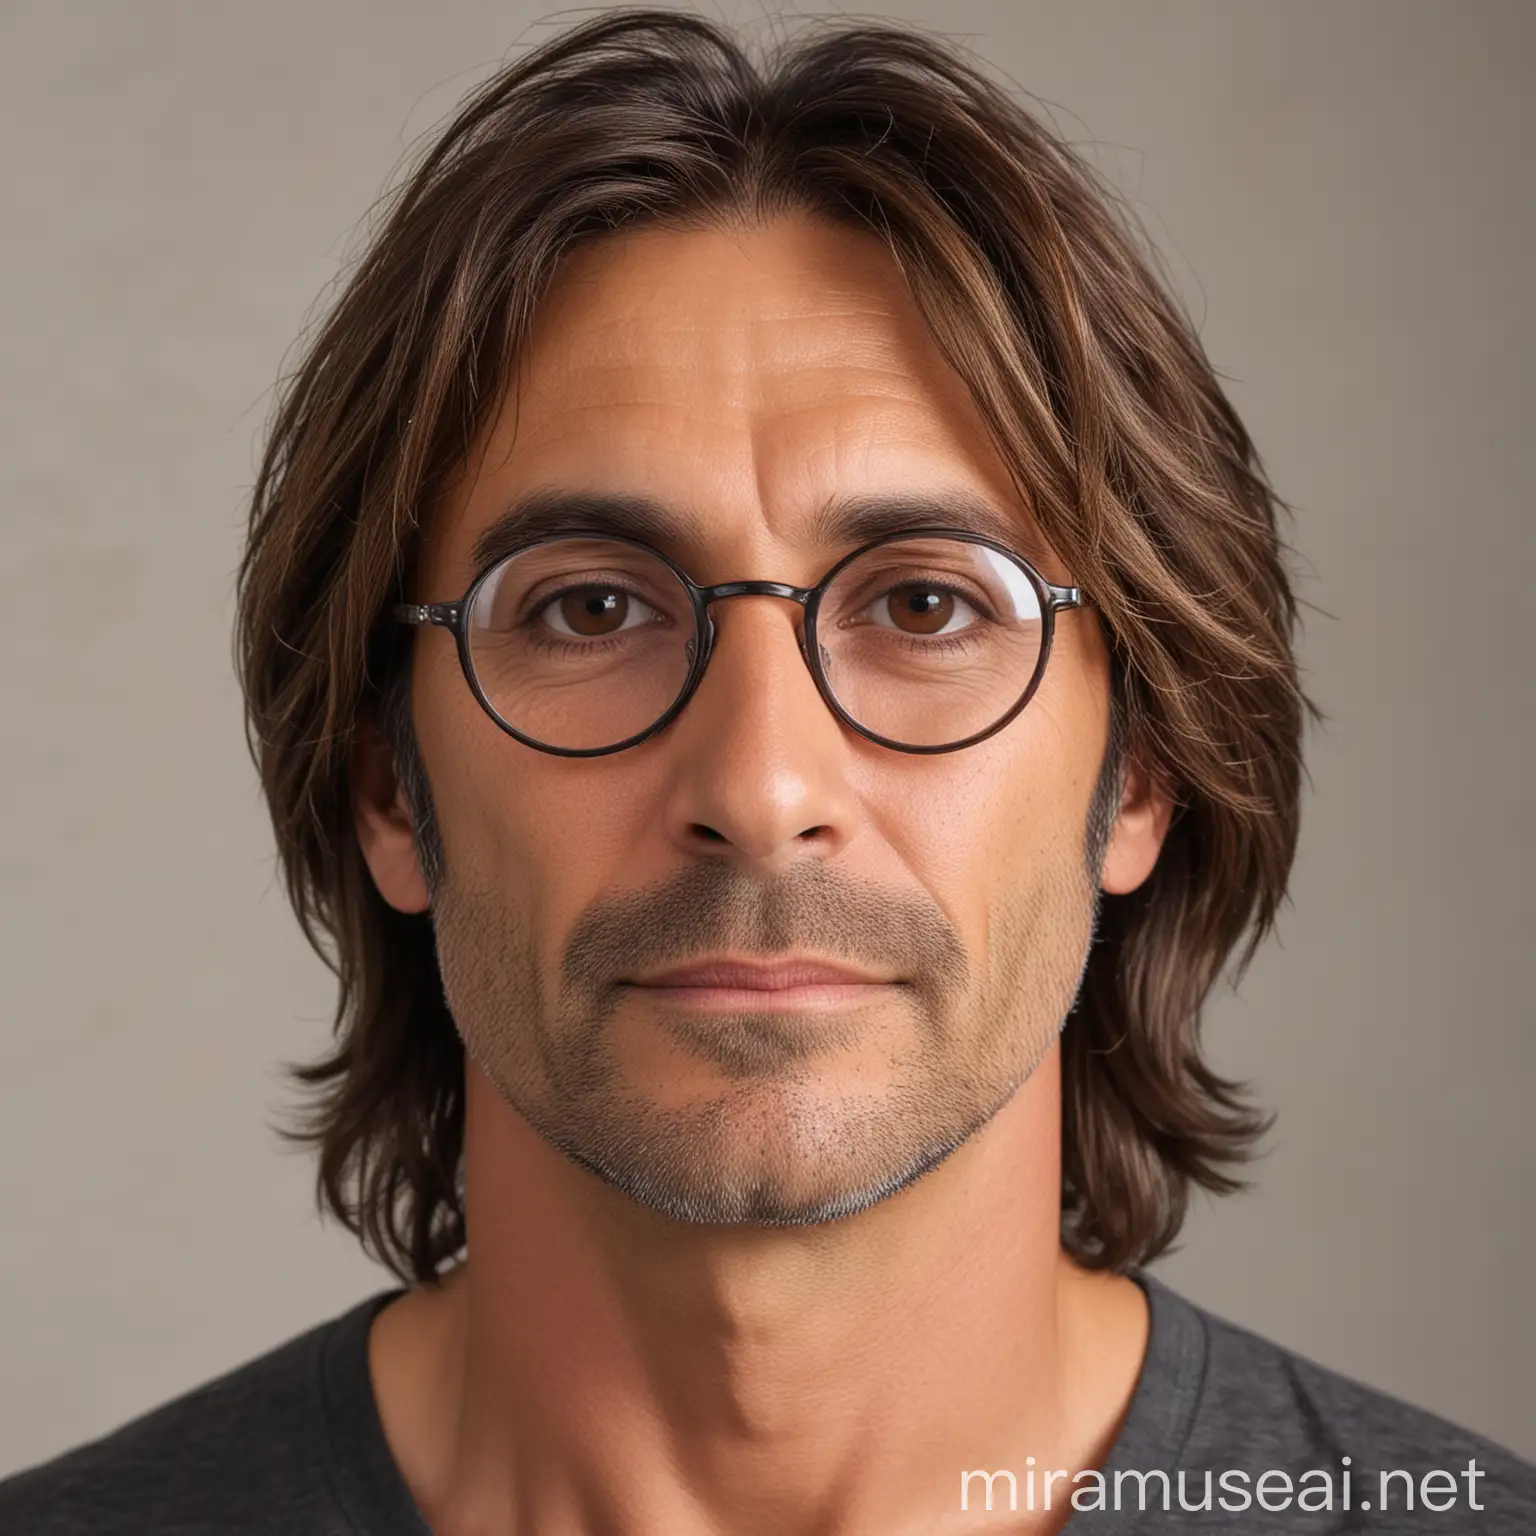 48 year old male, brown long hair, round glasses, stubble, brown eyes, small wrinkles around eyes